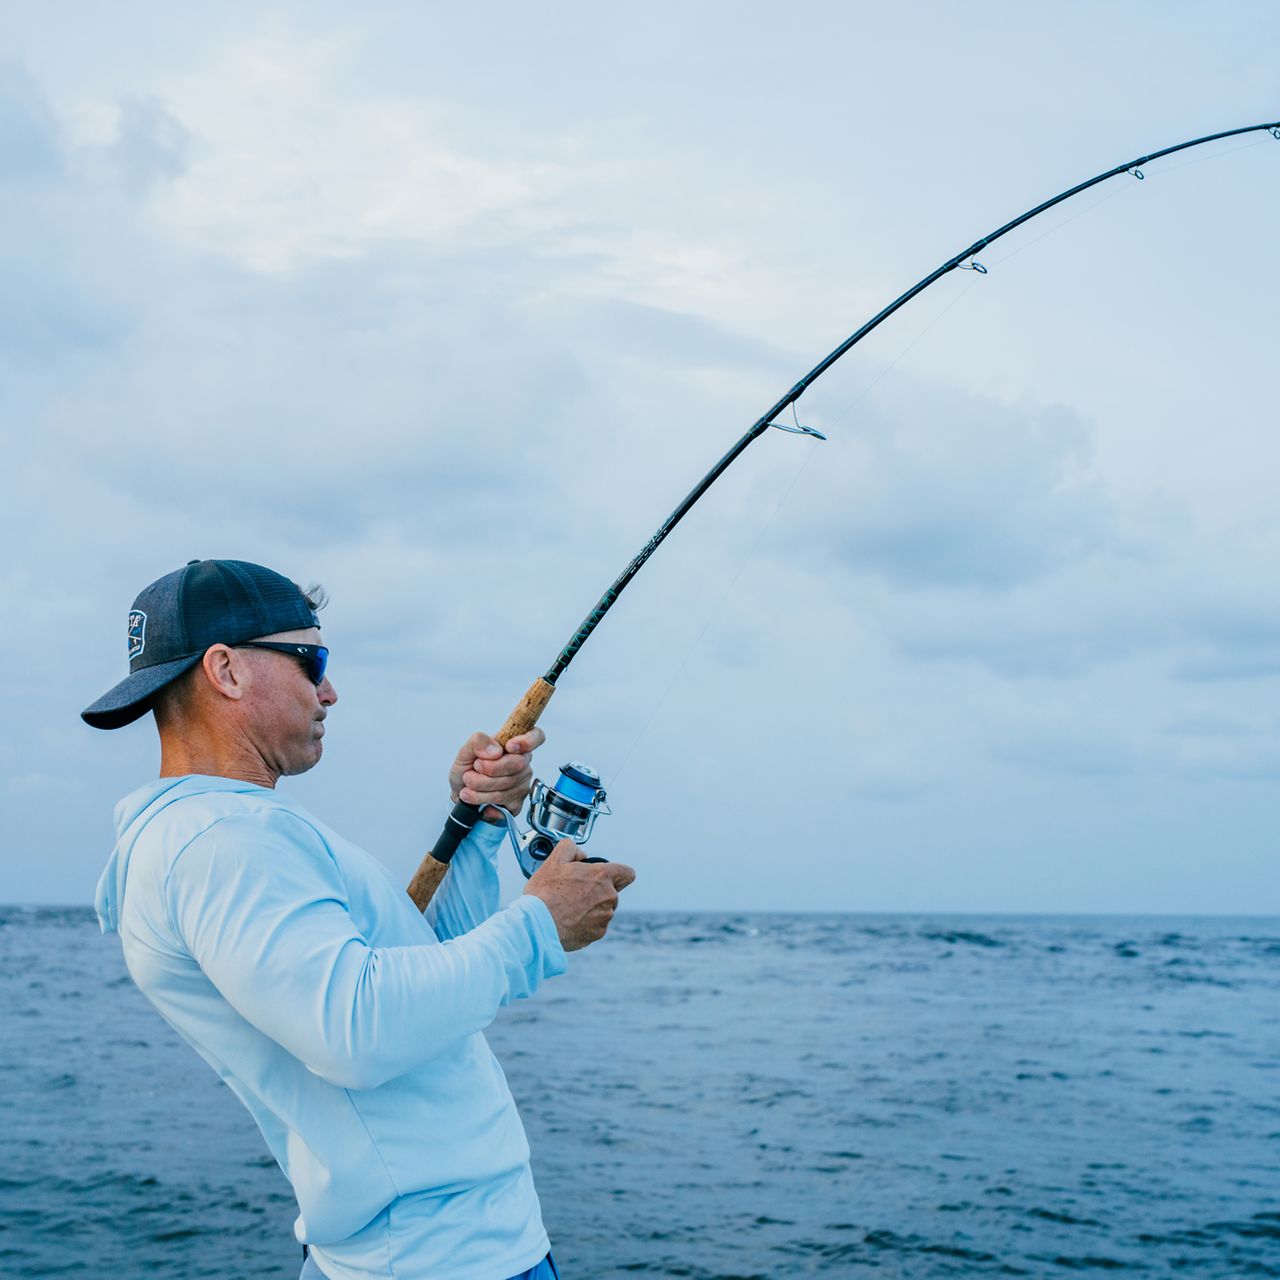 Essential Gear for Saltwater and Freshwater Fishing-For many coastal anglers, saltwater fishing isn’t just a favorite pastime — it’s a way of life. Whether fishing from the beach, boat or something in between, you need the right bait and the appropriate gear. Knowing the tidal cycles, diverse species of fish, and rules and regulations on the water is also key to a great fishing experience. Rods and reels, lines and leaders, and hooks and lures all differ depending on the location, conditions and type of fish you’re looking to catch. Perhaps the most essential aspect of both saltwater and freshwater fishing is being able to see beneath the water’s surface. And that’s where polarized fishing sunglasses come in handy. Because when you’re out fishing, polarized sunglasses aren’t just an accessory. They’re a tool. They cut through the glare that occurs when sunlight reflects off the water’s surface. Wearing polarized fishing sunglasses is key to enhancing your visibility on the water and finding your next catch. Polarized sunglasses from Costa are designed for the angler’s lifestyle. They effectively filter glare to help you see fish in the water. Wearing them can improve your visual comfort and your chances of landing your catch.